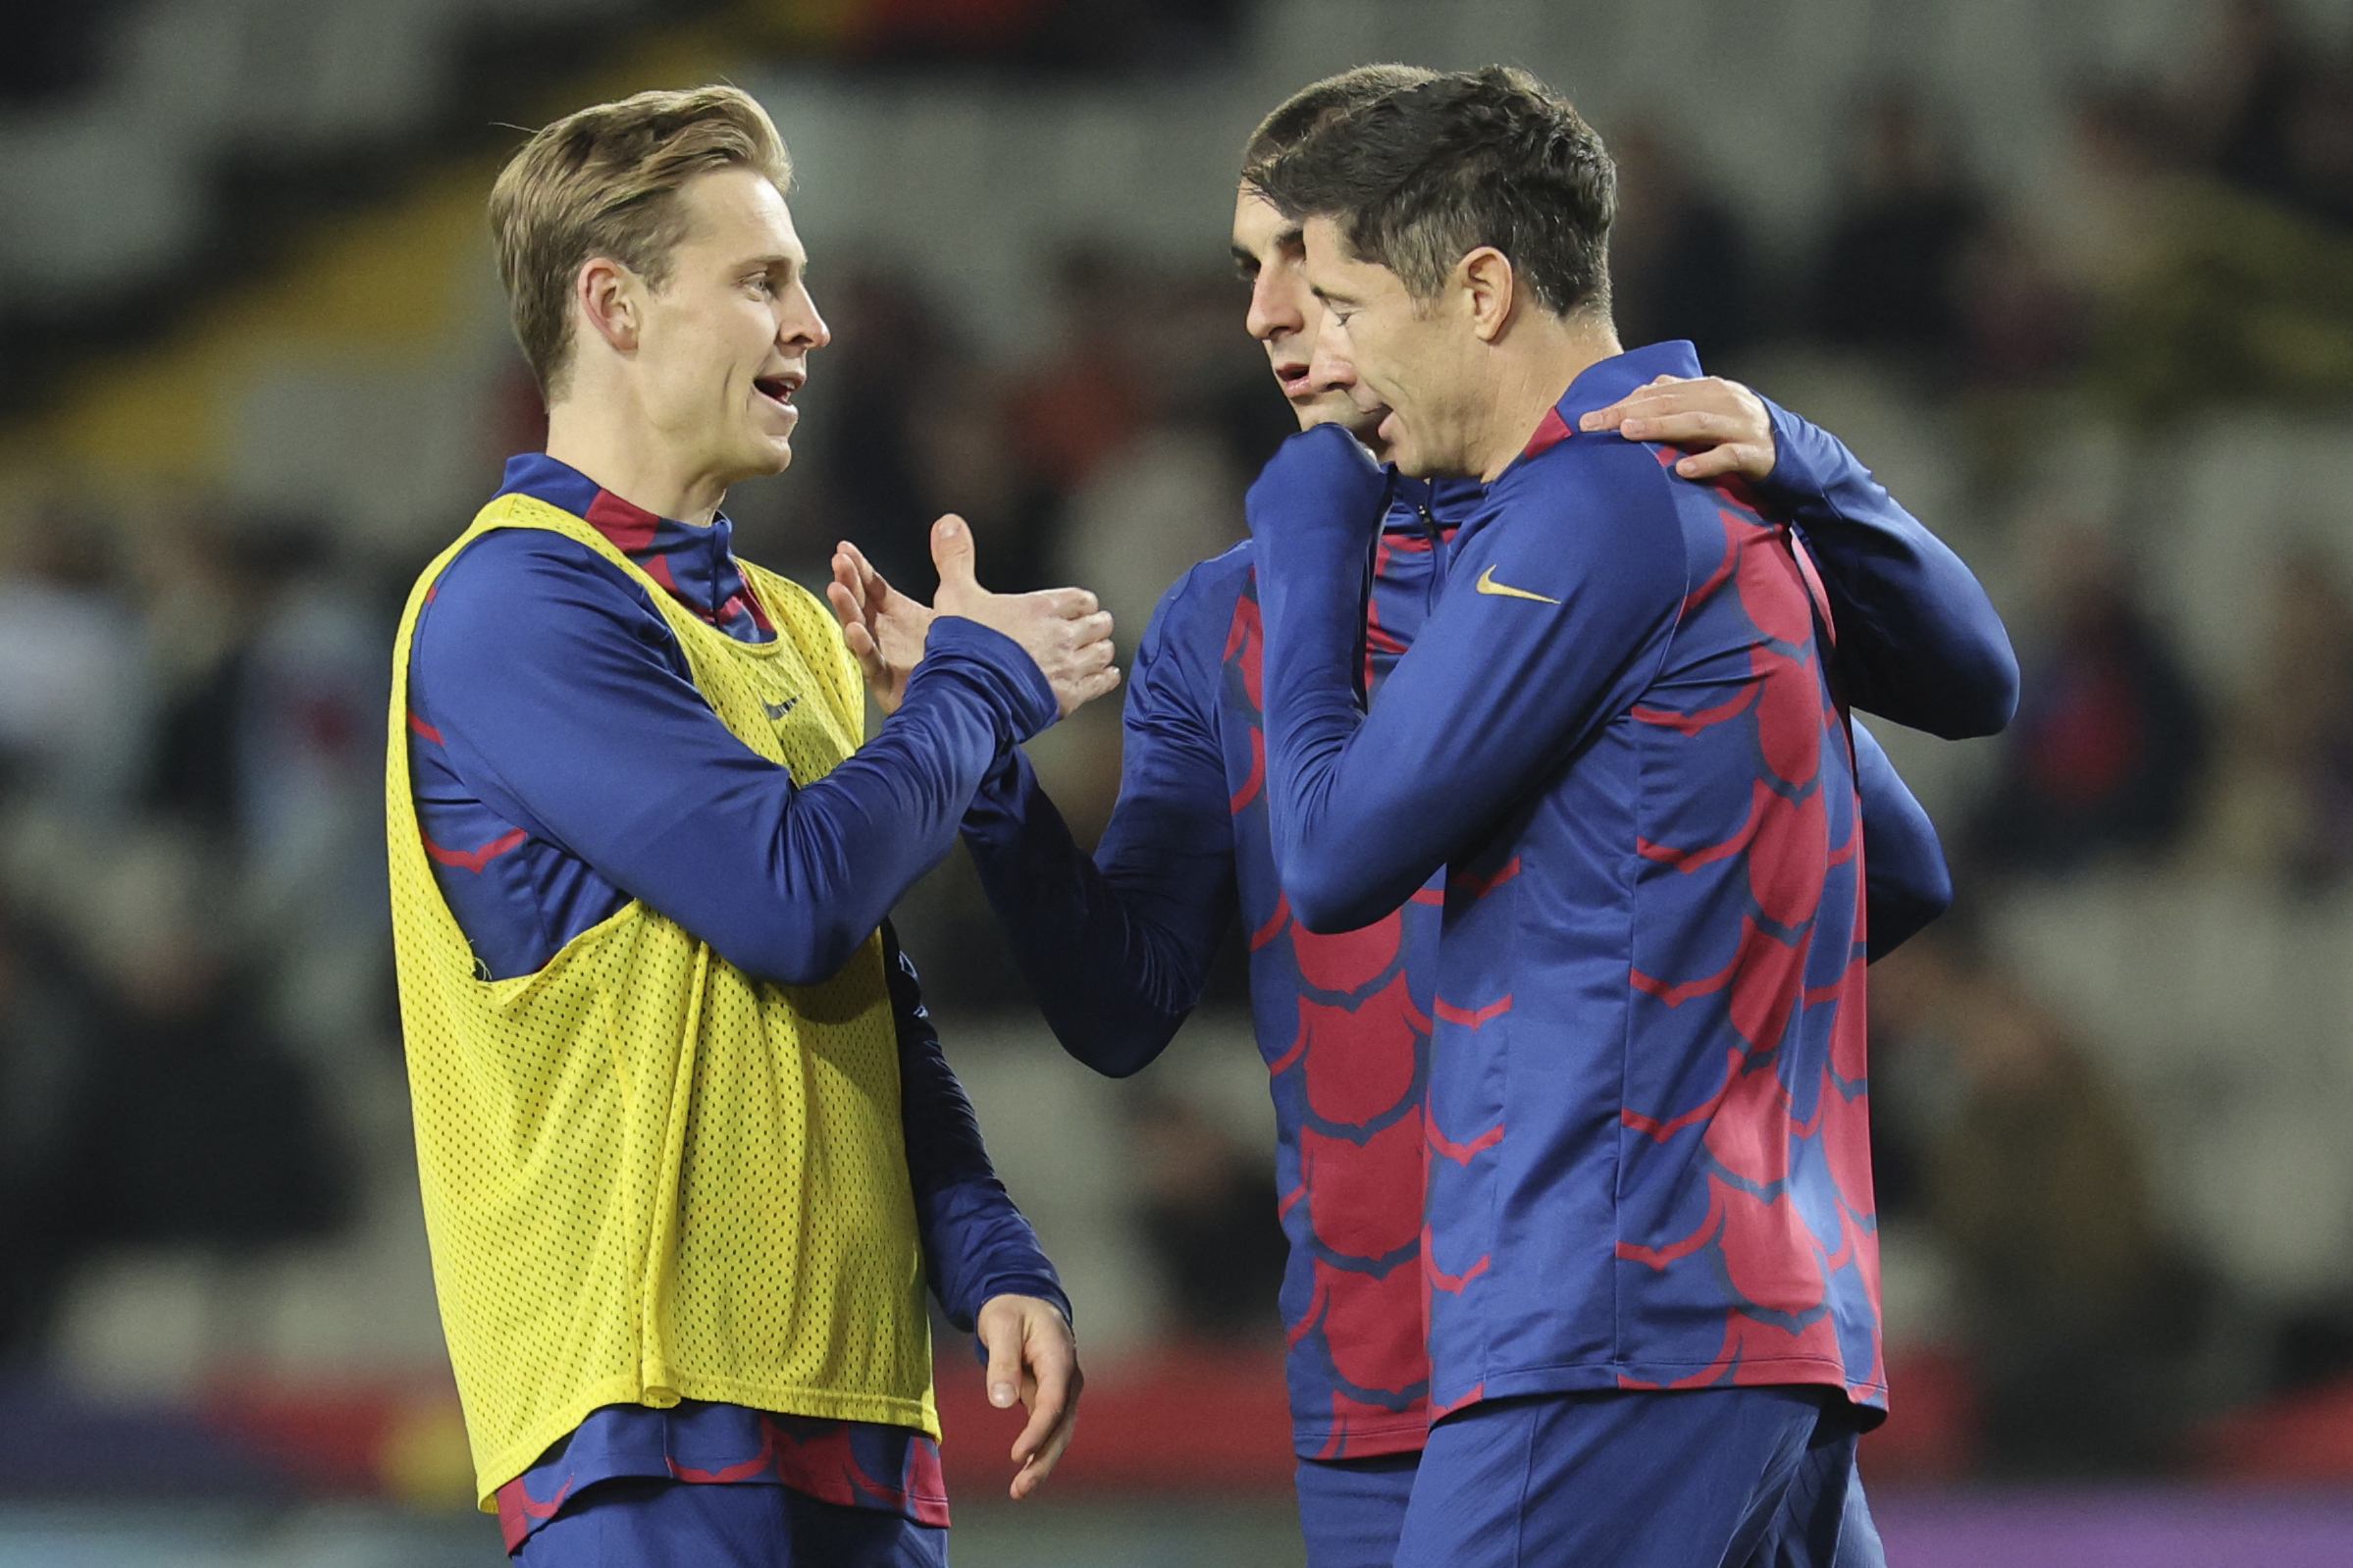 Barcelona's Dutch midfielder #21 Frenkie de Jong (L), Barcelona's Spanish forward #07 Ferran Torres and Barcelona's Polish forward #09 Robert Lewandowski (R) talk together during the warming-up before the Spanish league football match between FC Barcelona and CA Osasuna at the Estadi Olimpic Lluis Companys in Barcelona on January 31, 2024.